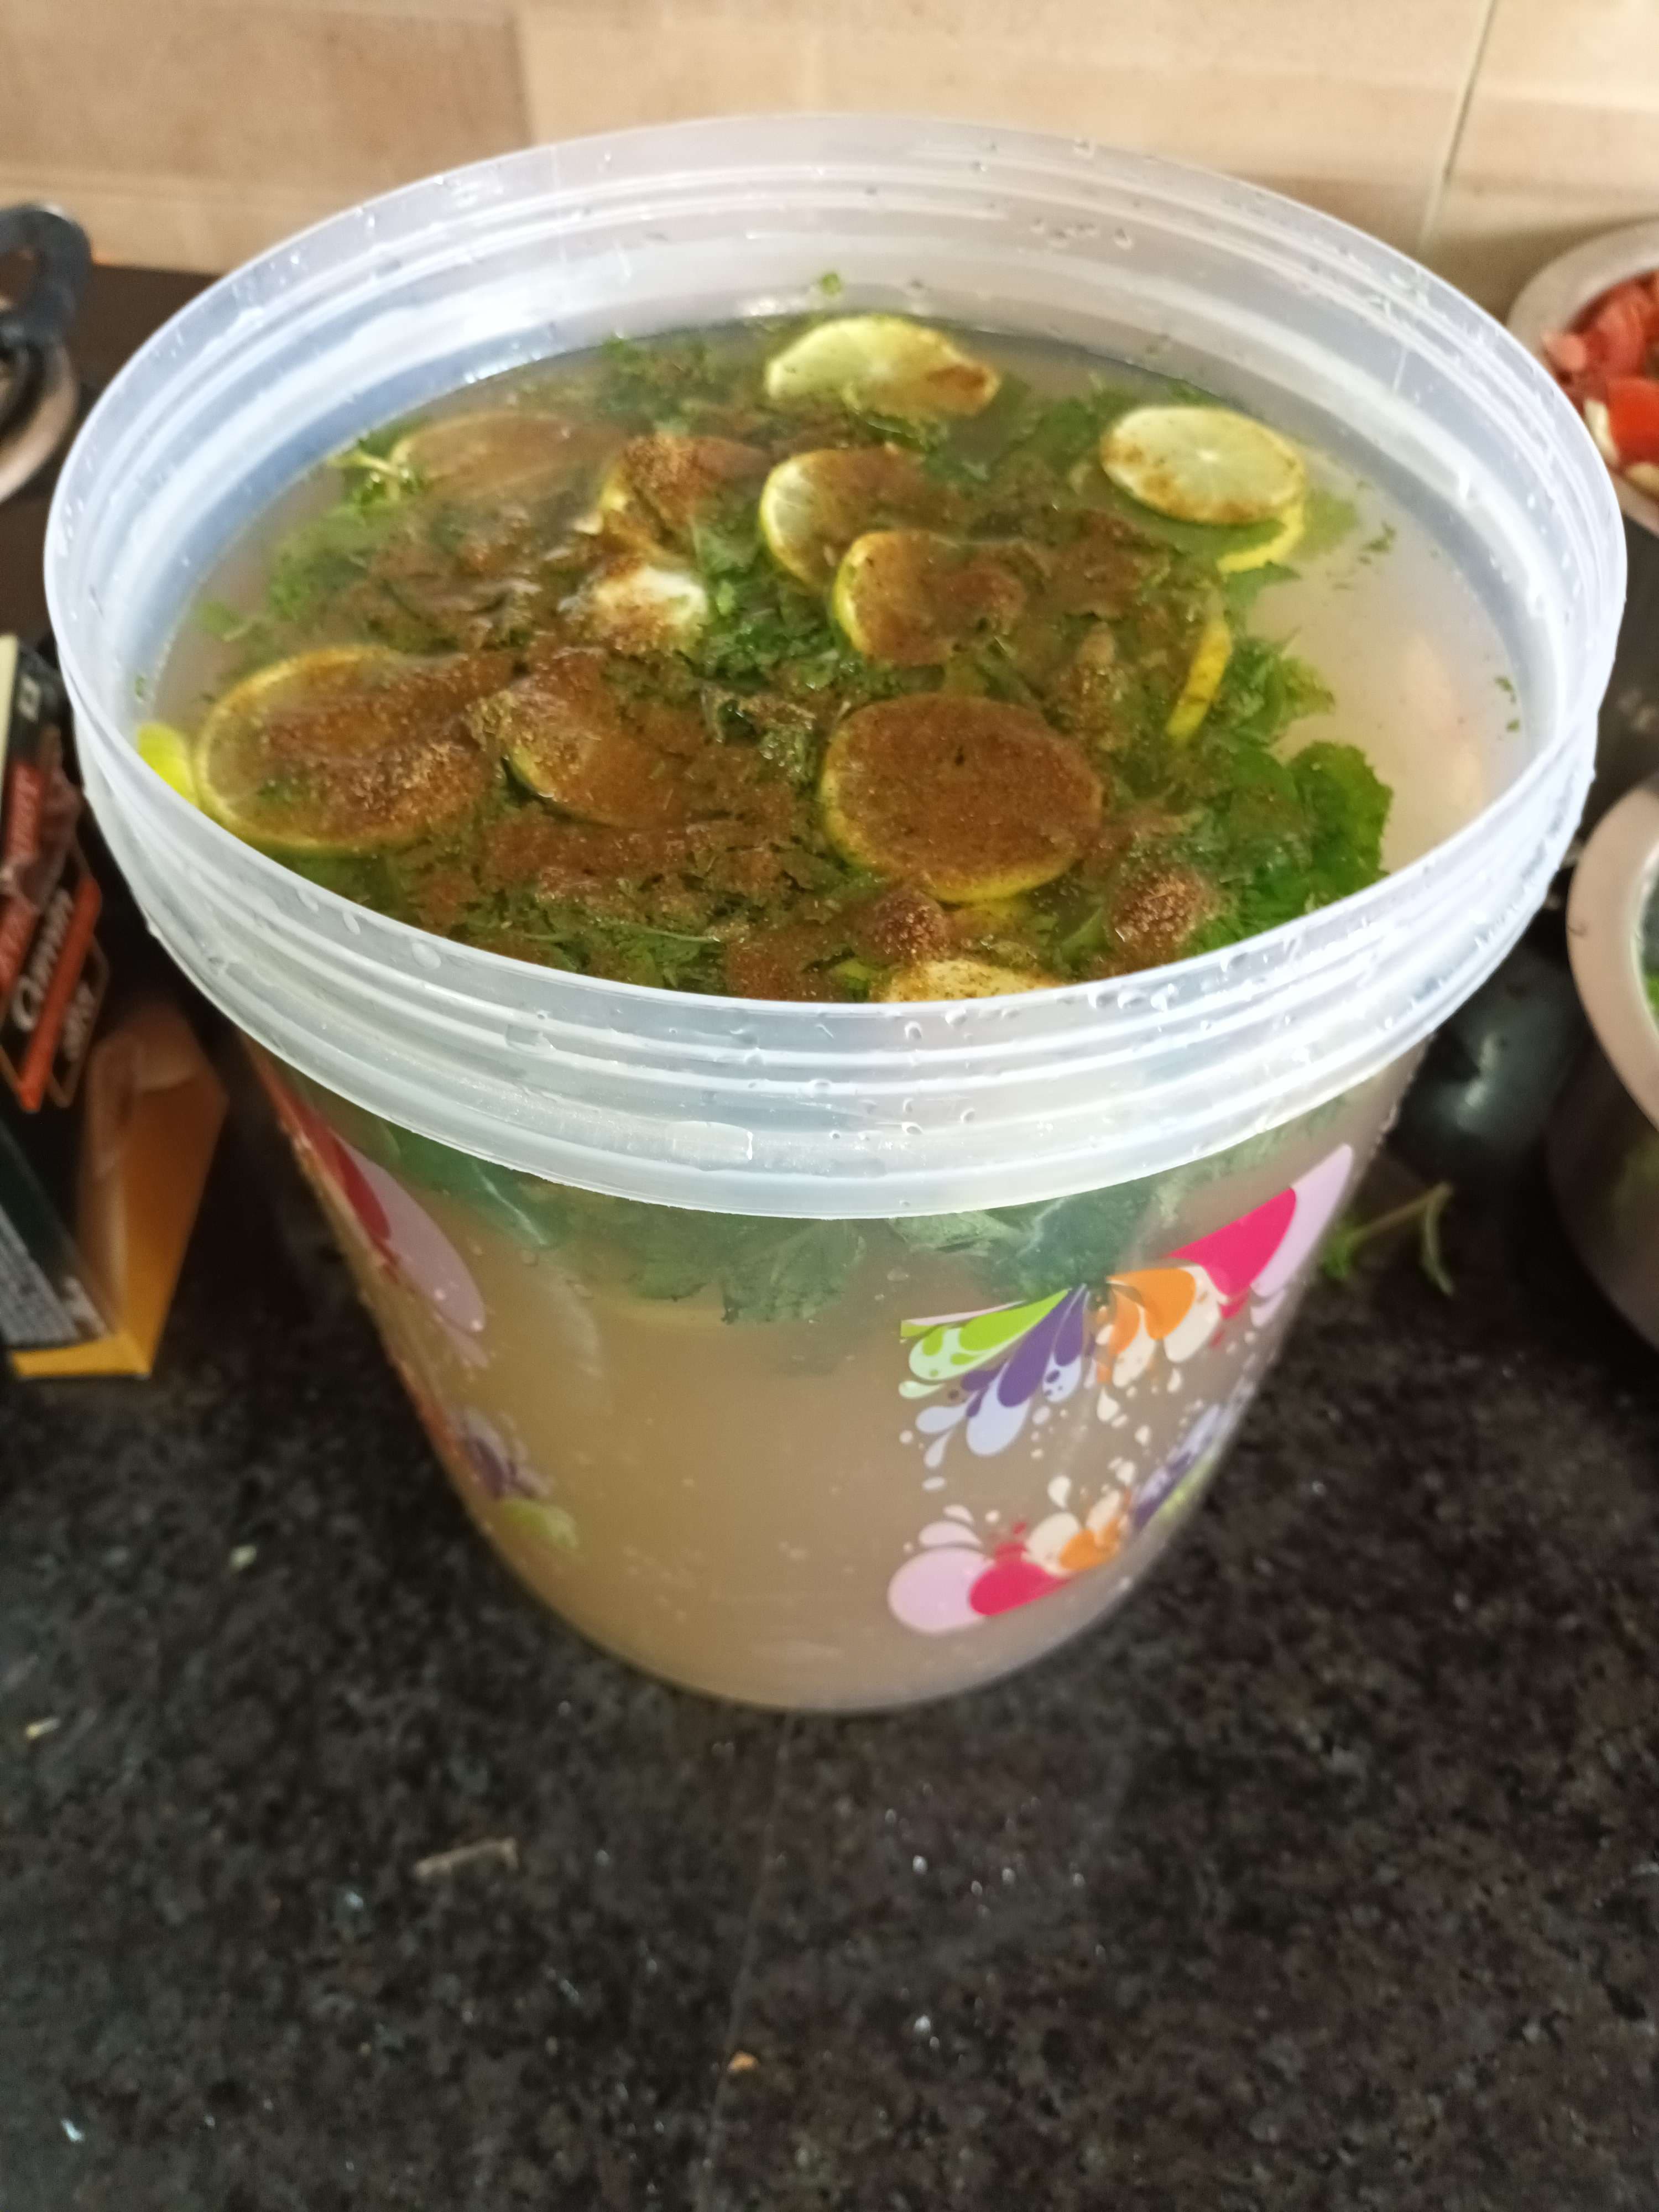 Tasty Lemonade Masala cooked by COOX chefs cooks during occasions parties events at home